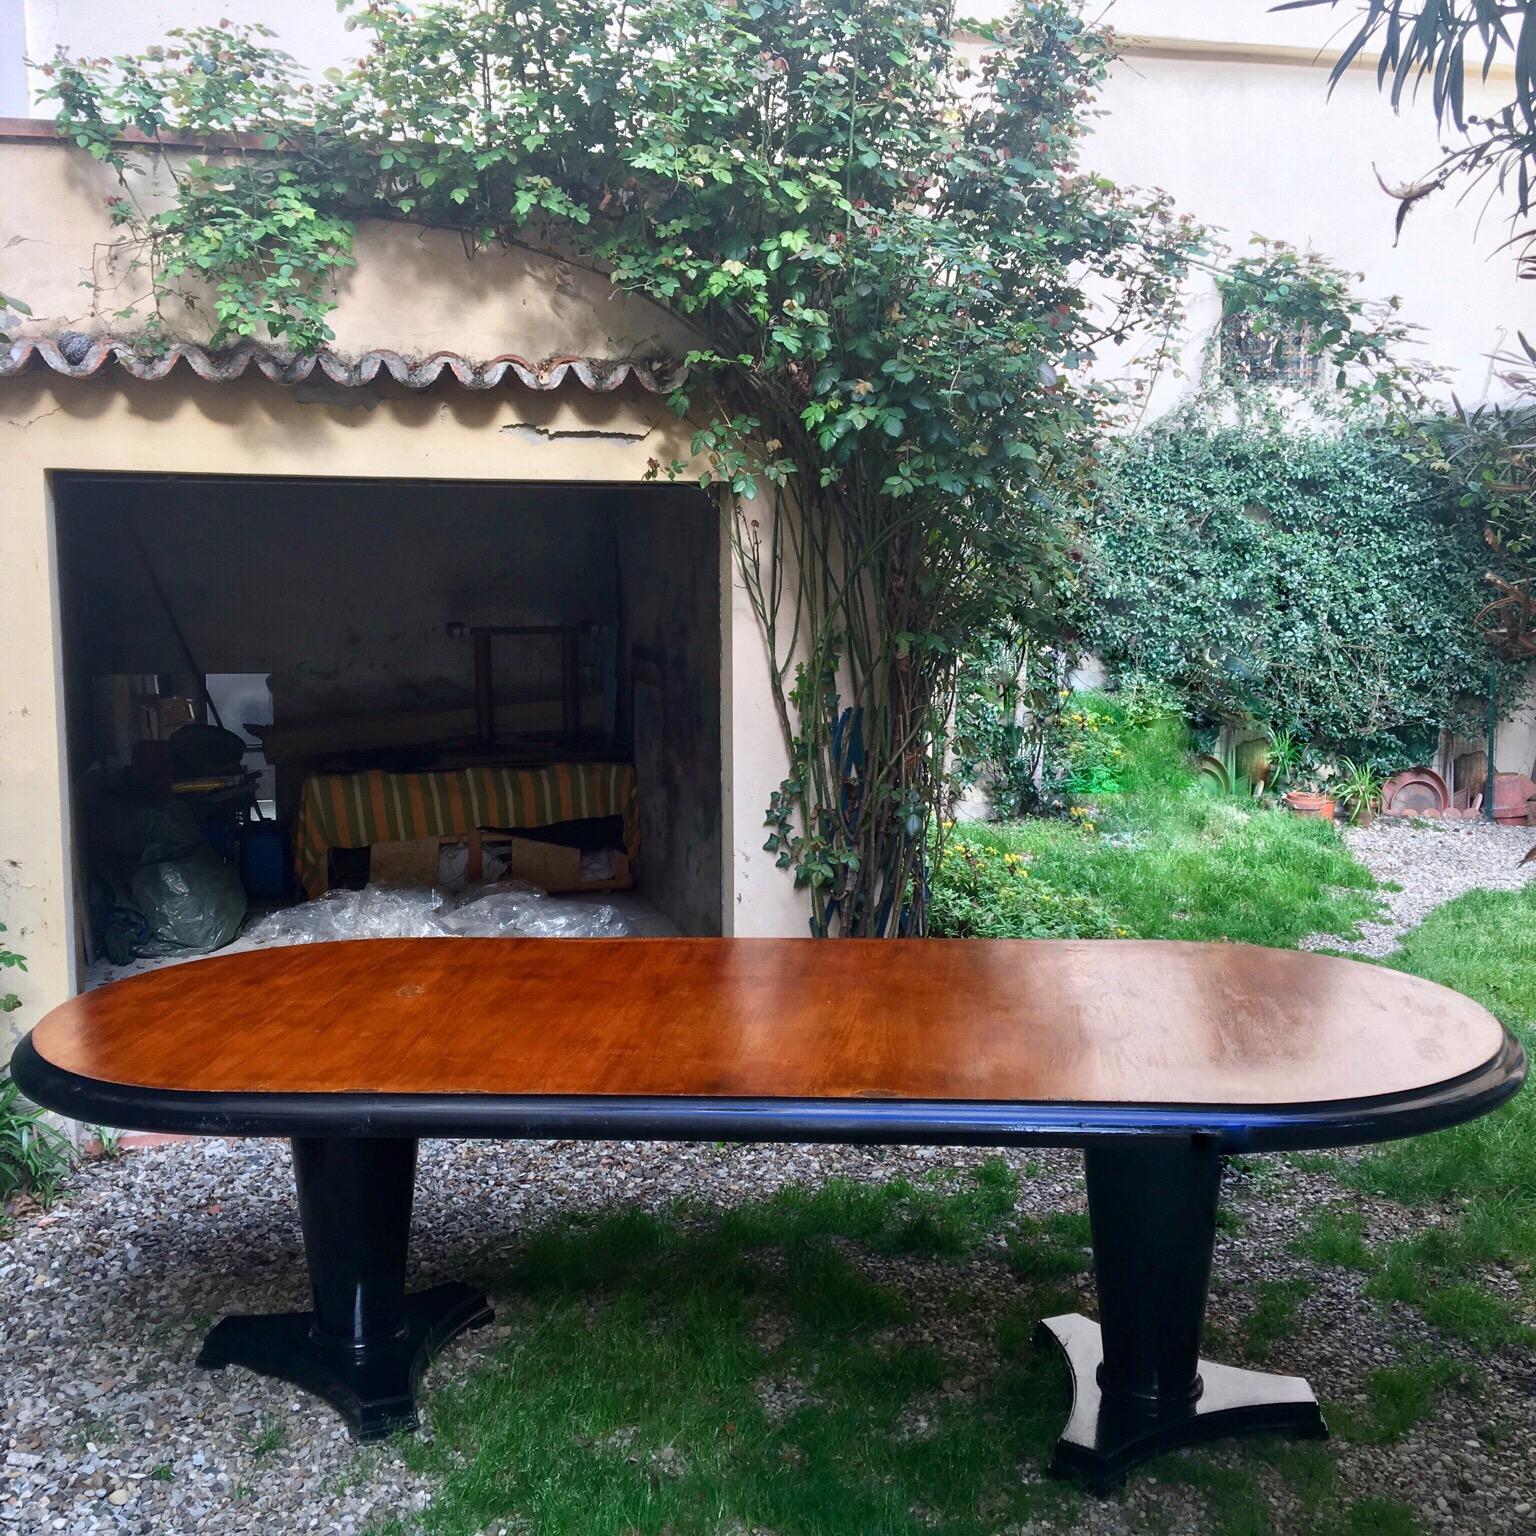 Art Deco oval dining table in mahogany wood with black ebonized edge. The two pedestal bases are in ebonized black wood and they have a conic shape.